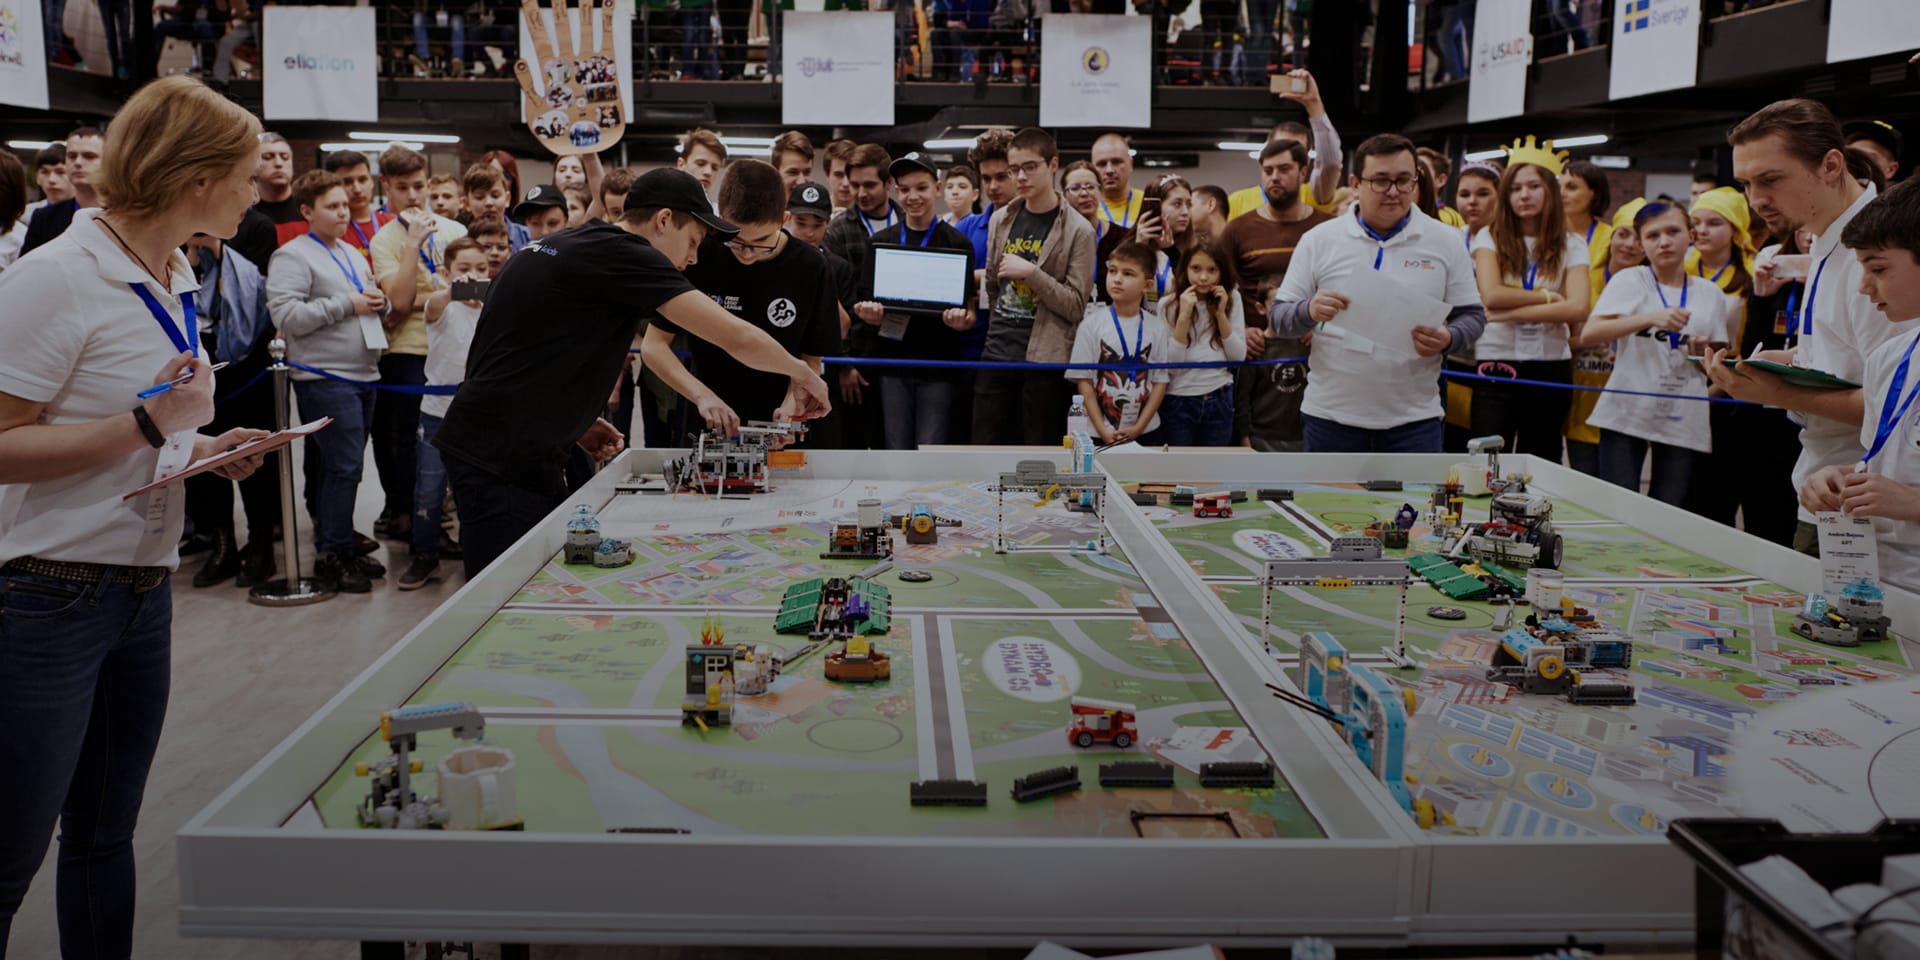 Youth compete in a robotics competition.